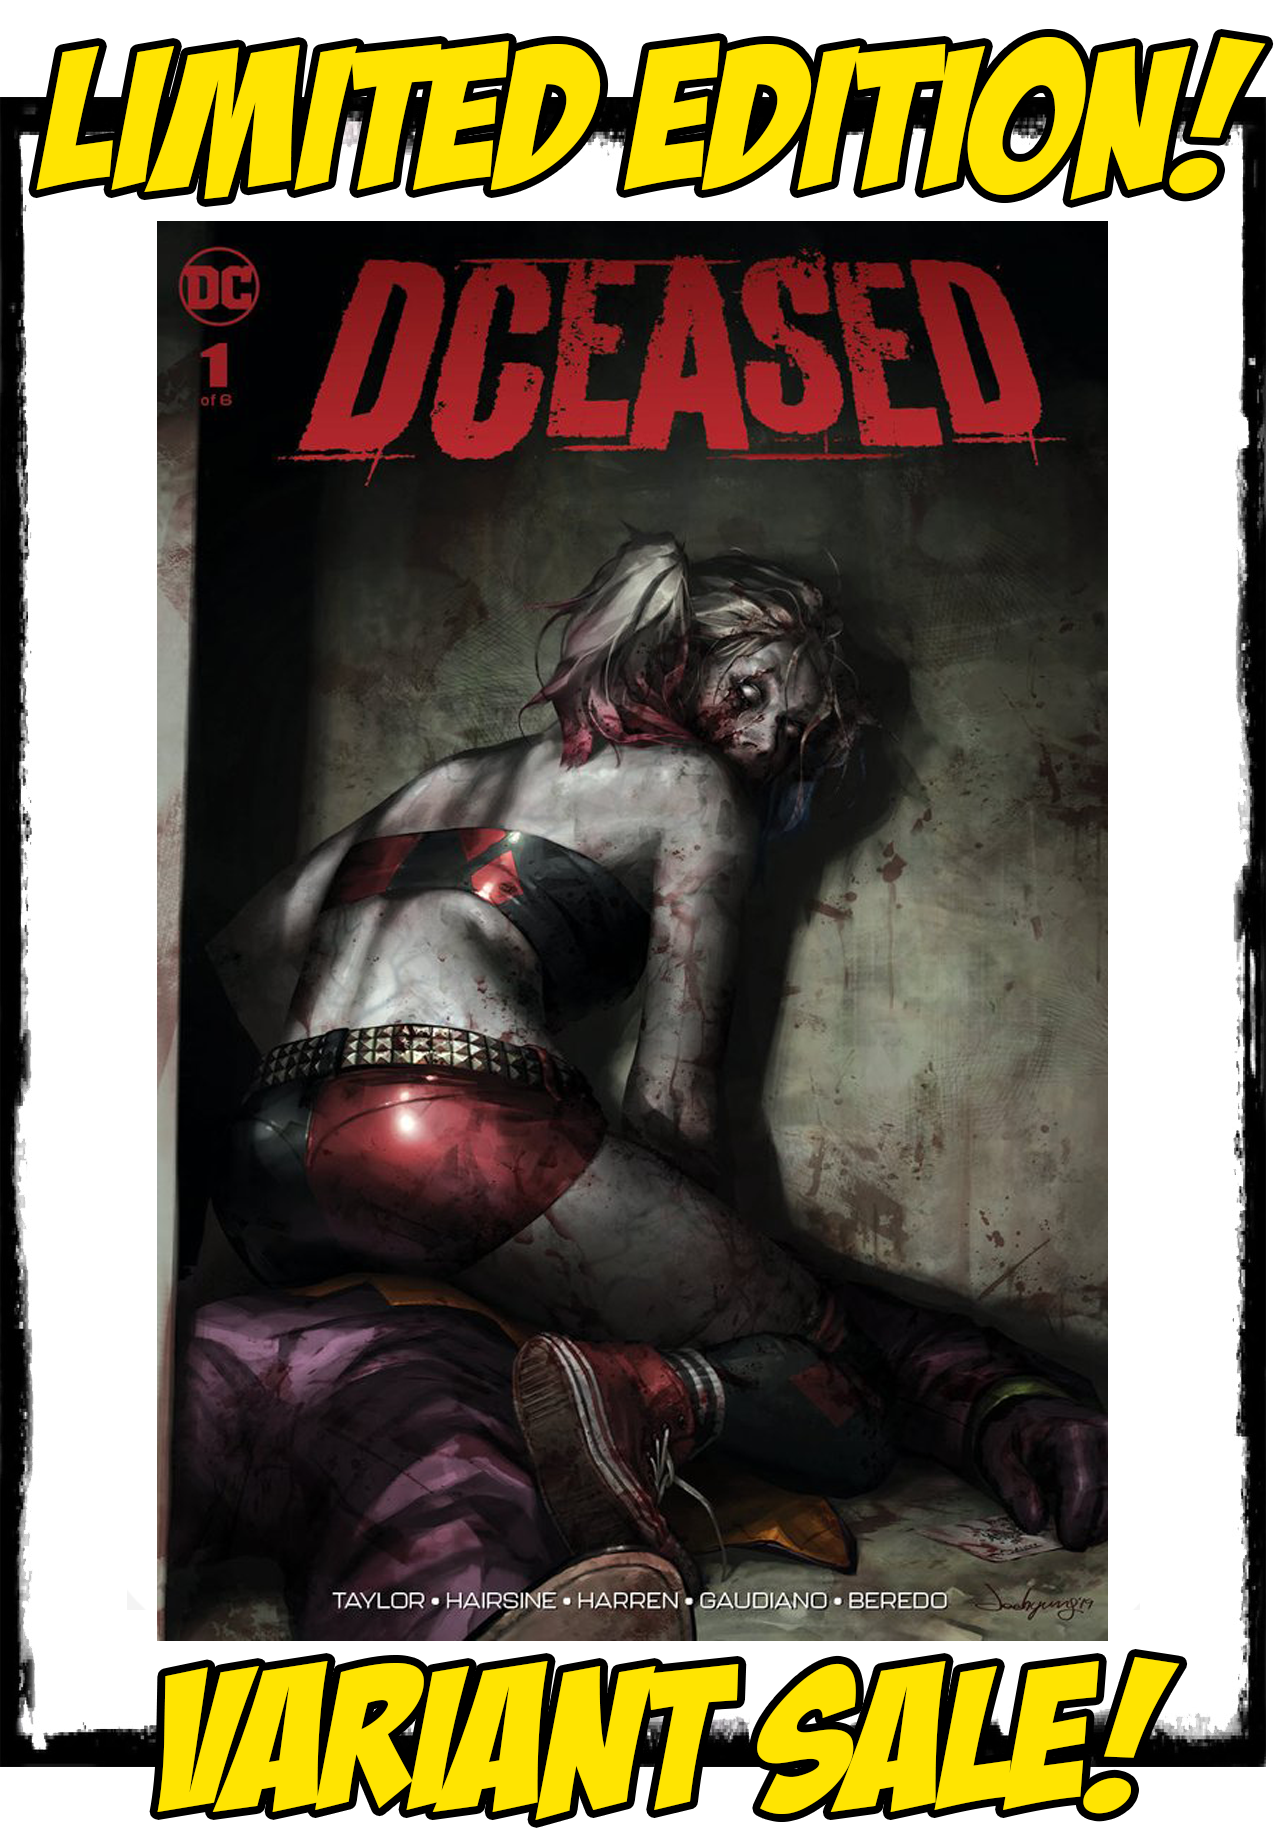 DCEASED - #1 JEEHYUNG LEE VARIANT (2019 - CONDITION NM)